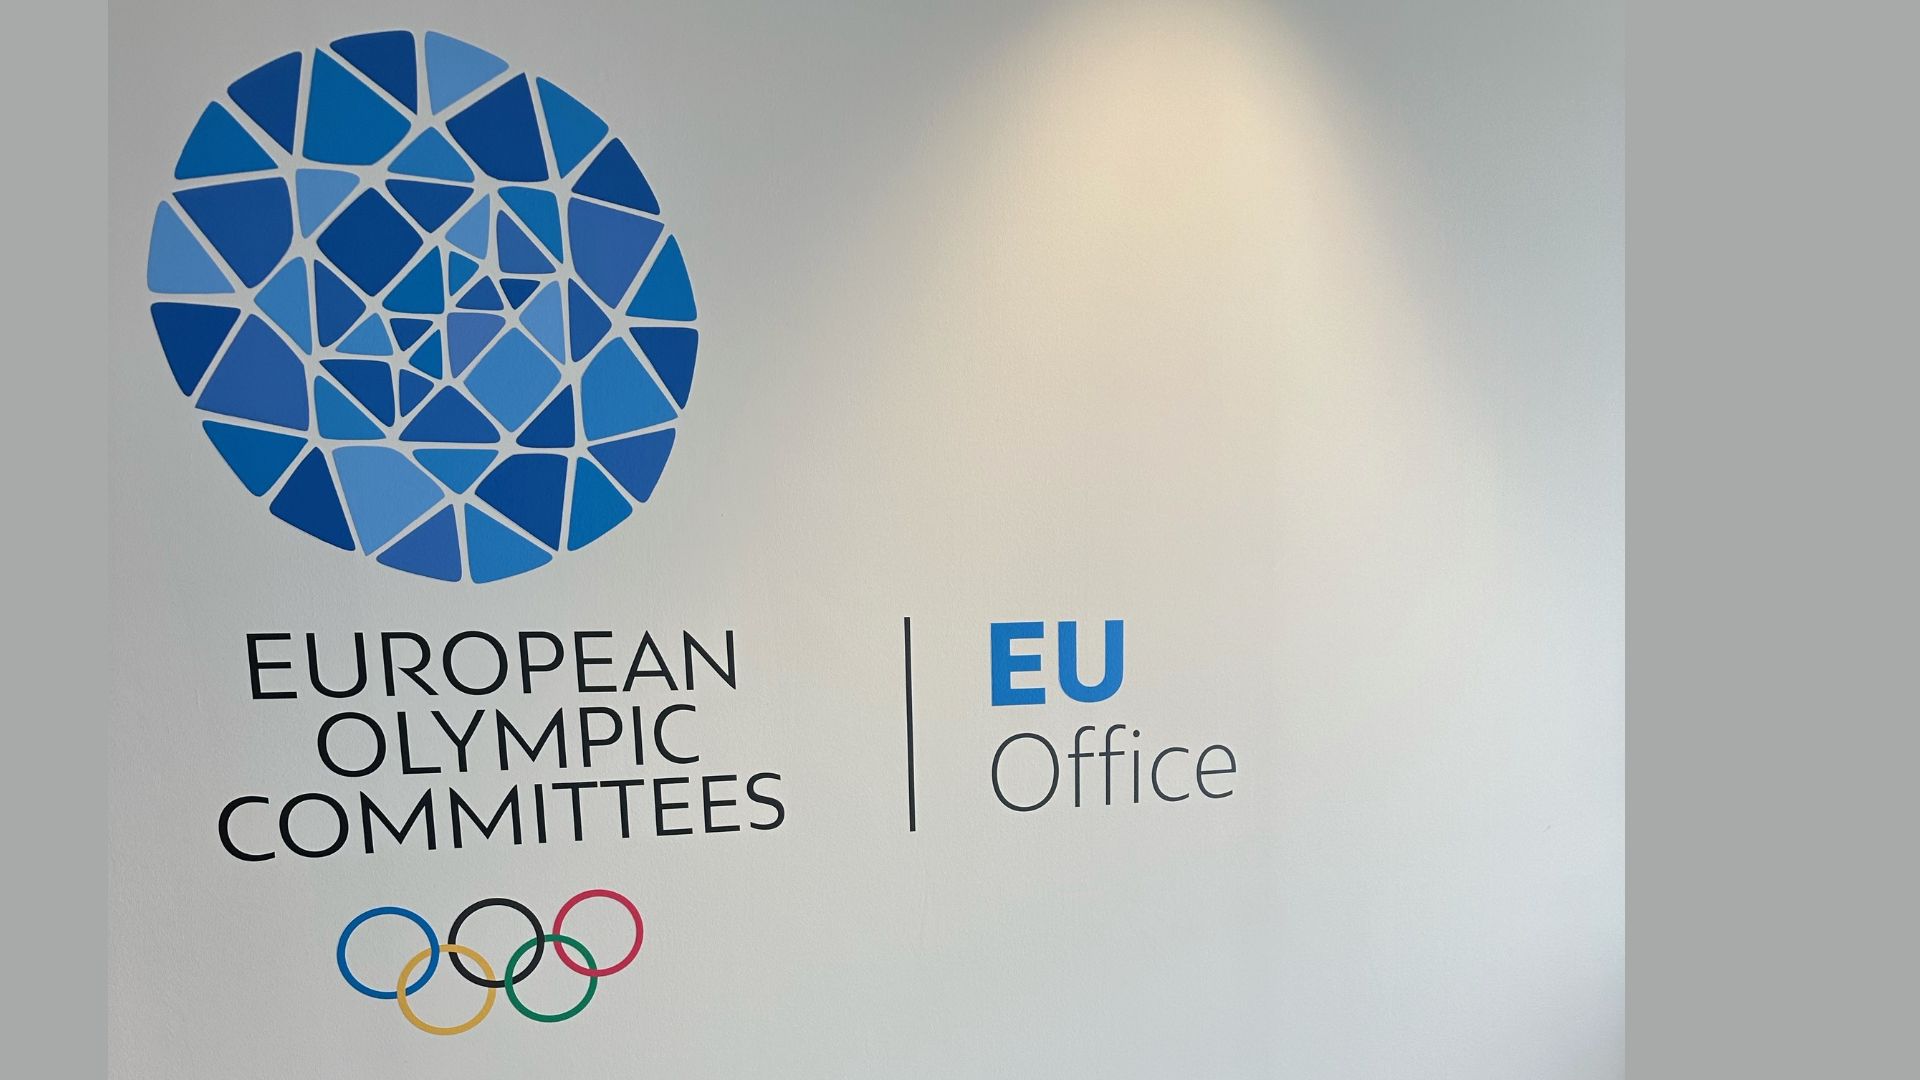 A photo of a banner which shows the EOC logo, plus the words 'European Olympic Committees' and 'EU Office'